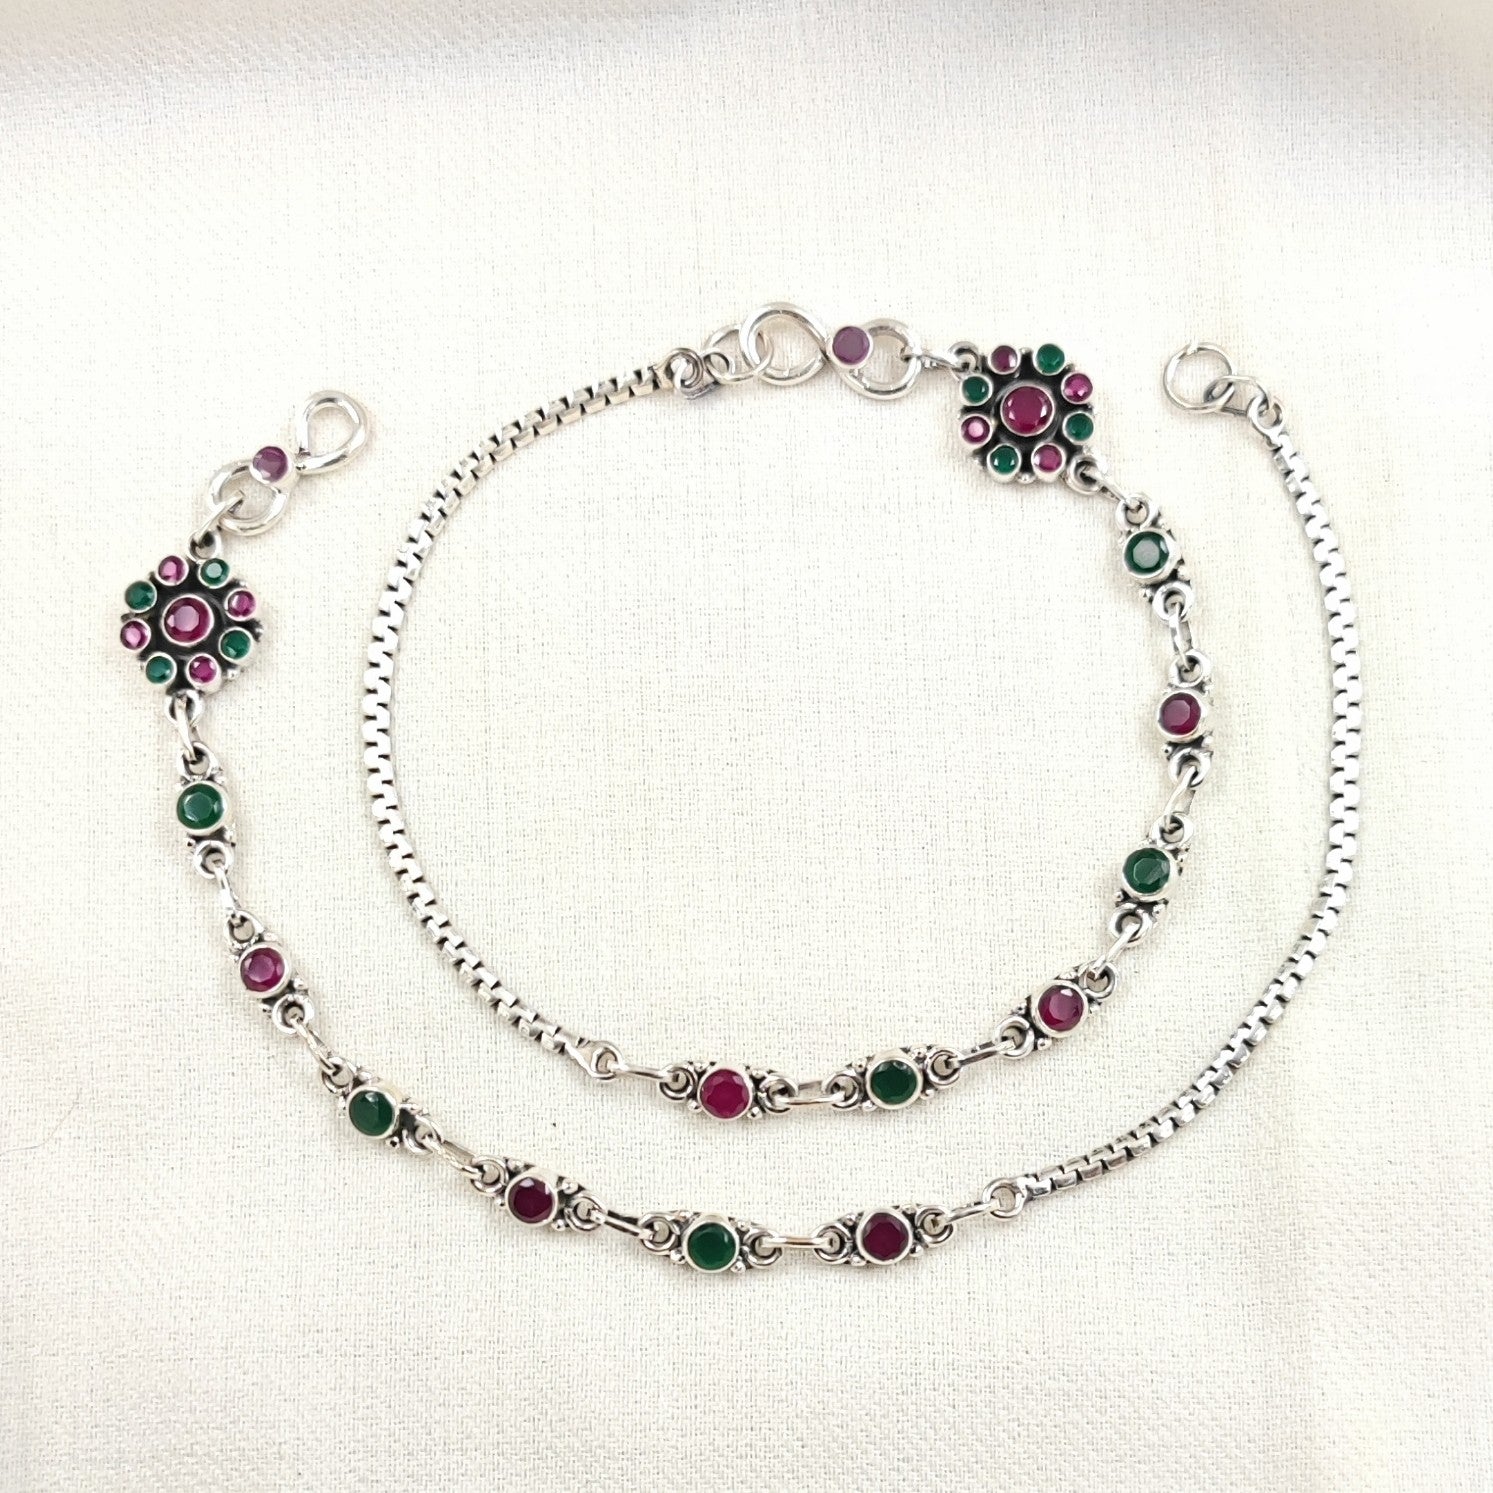 Silver Jewelry Anklets by Jauhri 92.5 Silver - Red Green Flower Dot Anklets